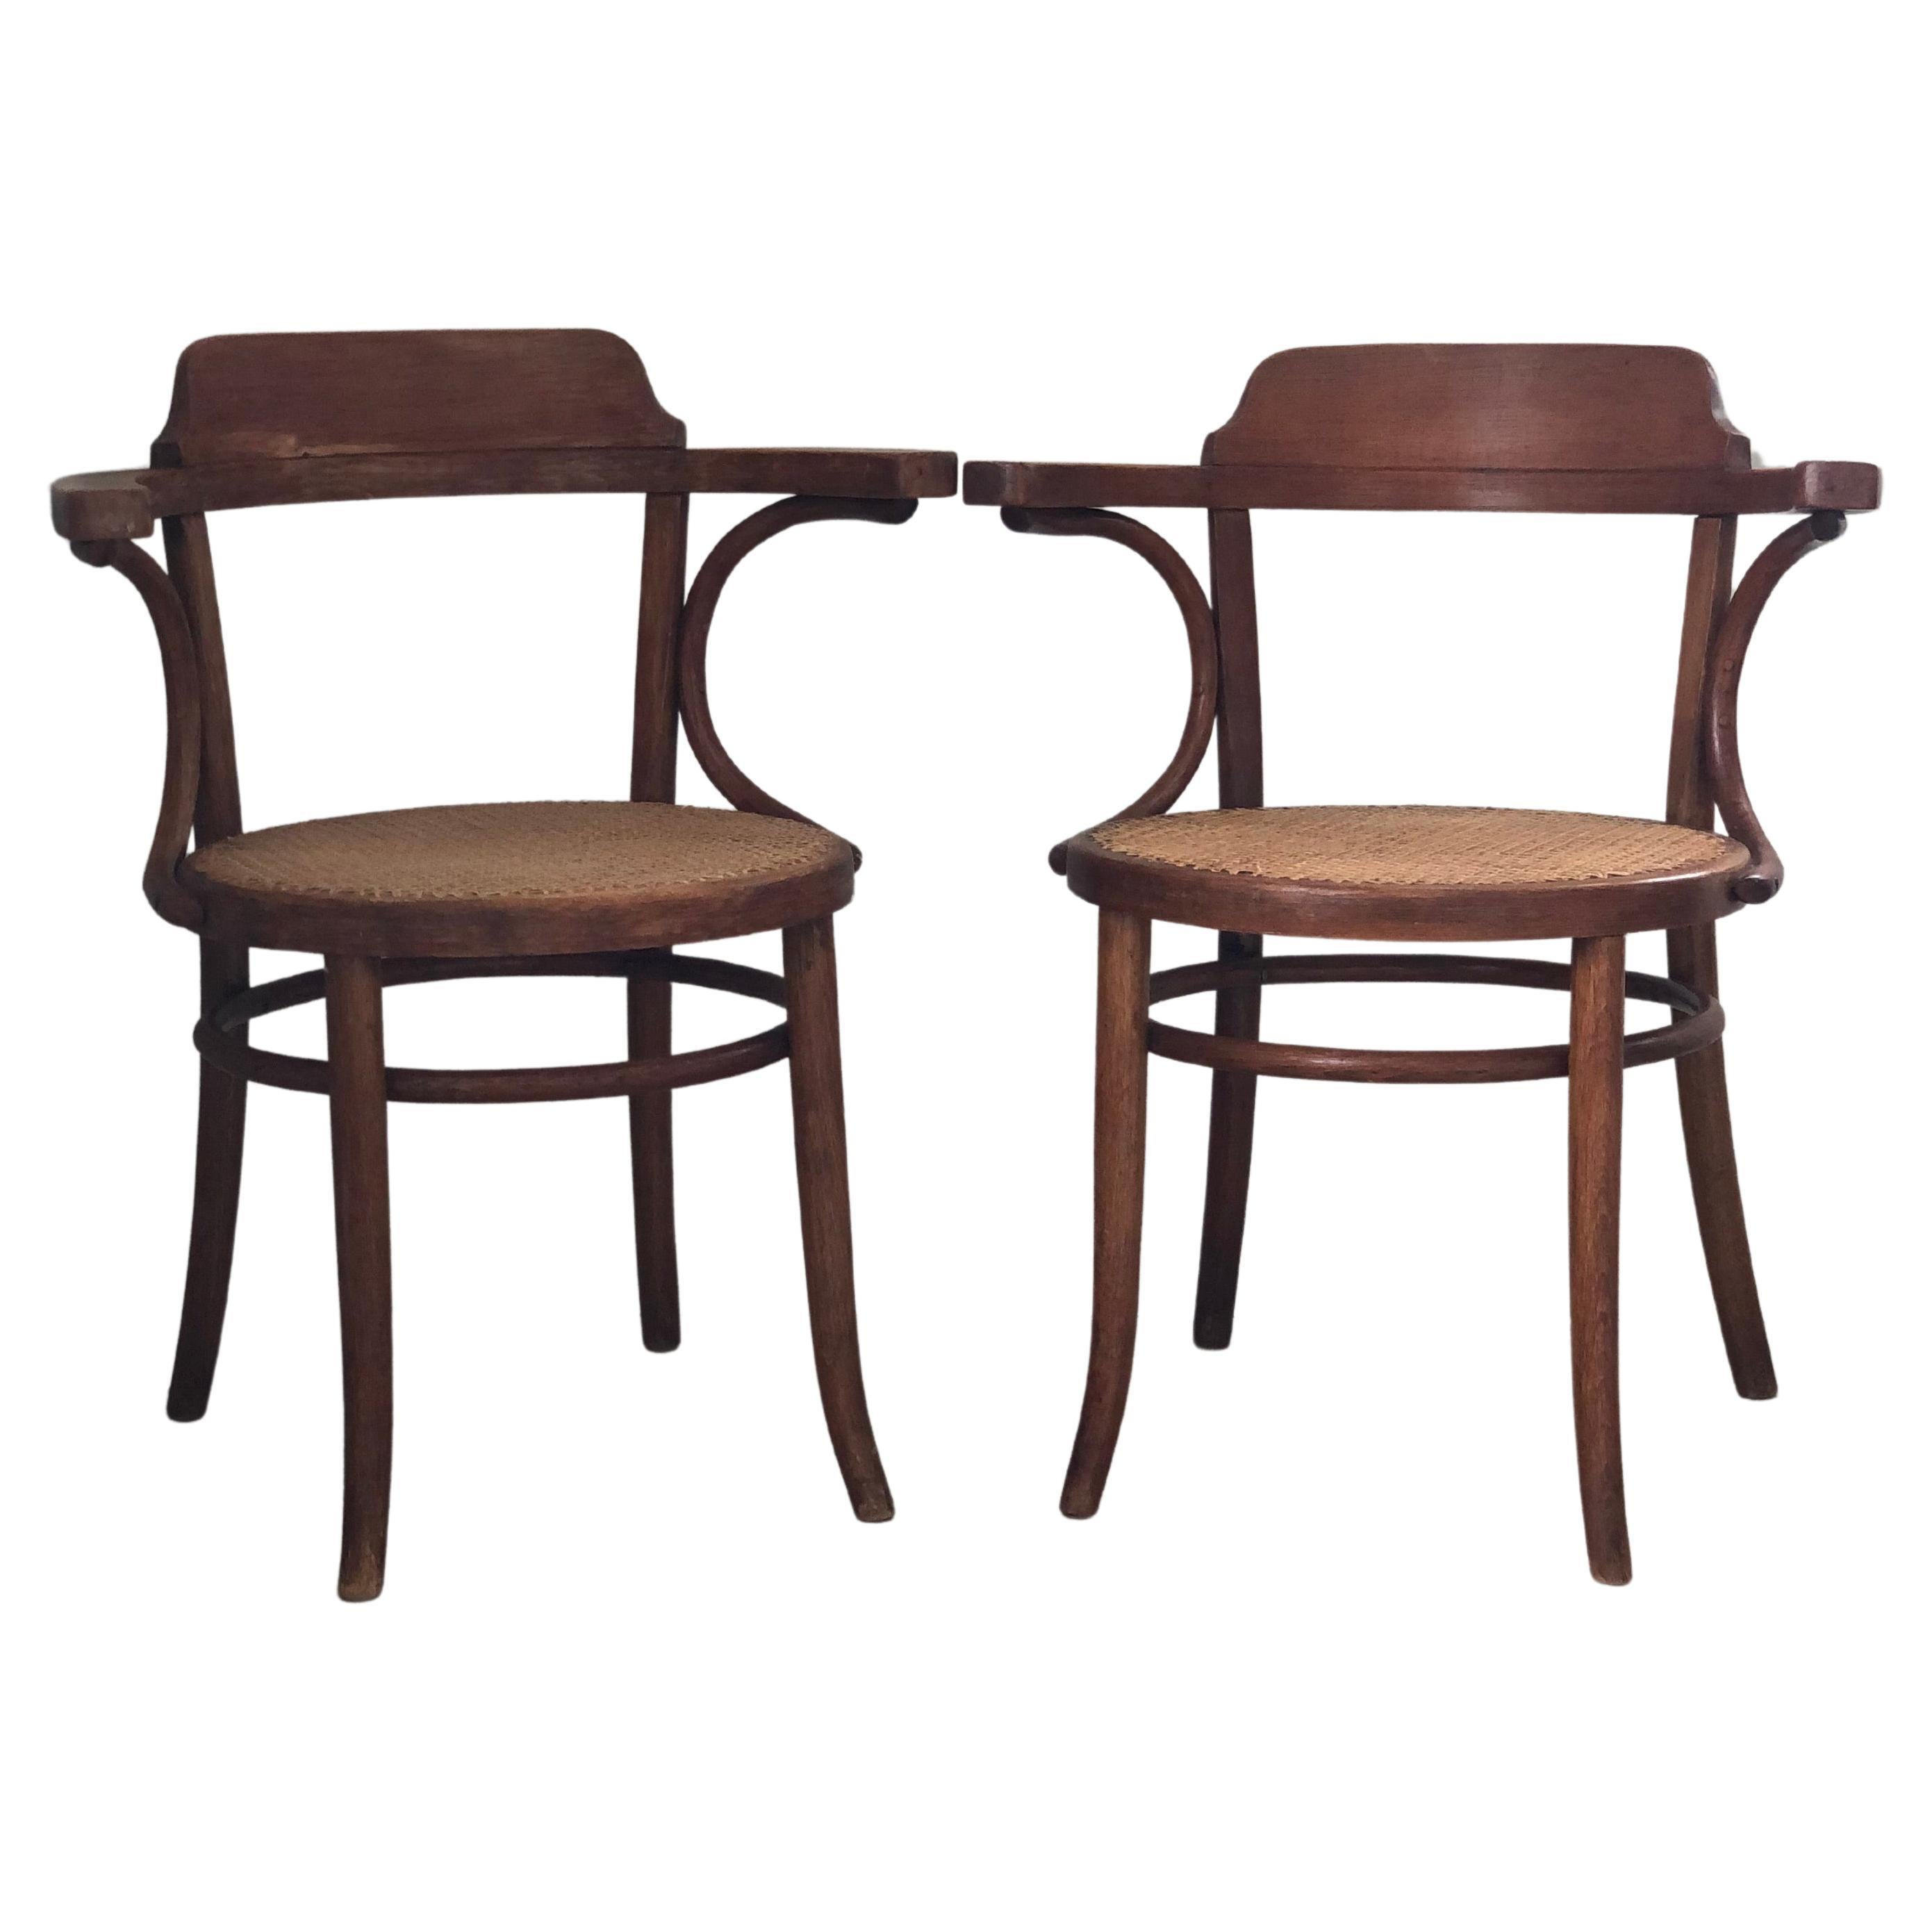 A Pair of Mid Century Thonet Dining Chair Bentwood with Cane 1950s For Sale